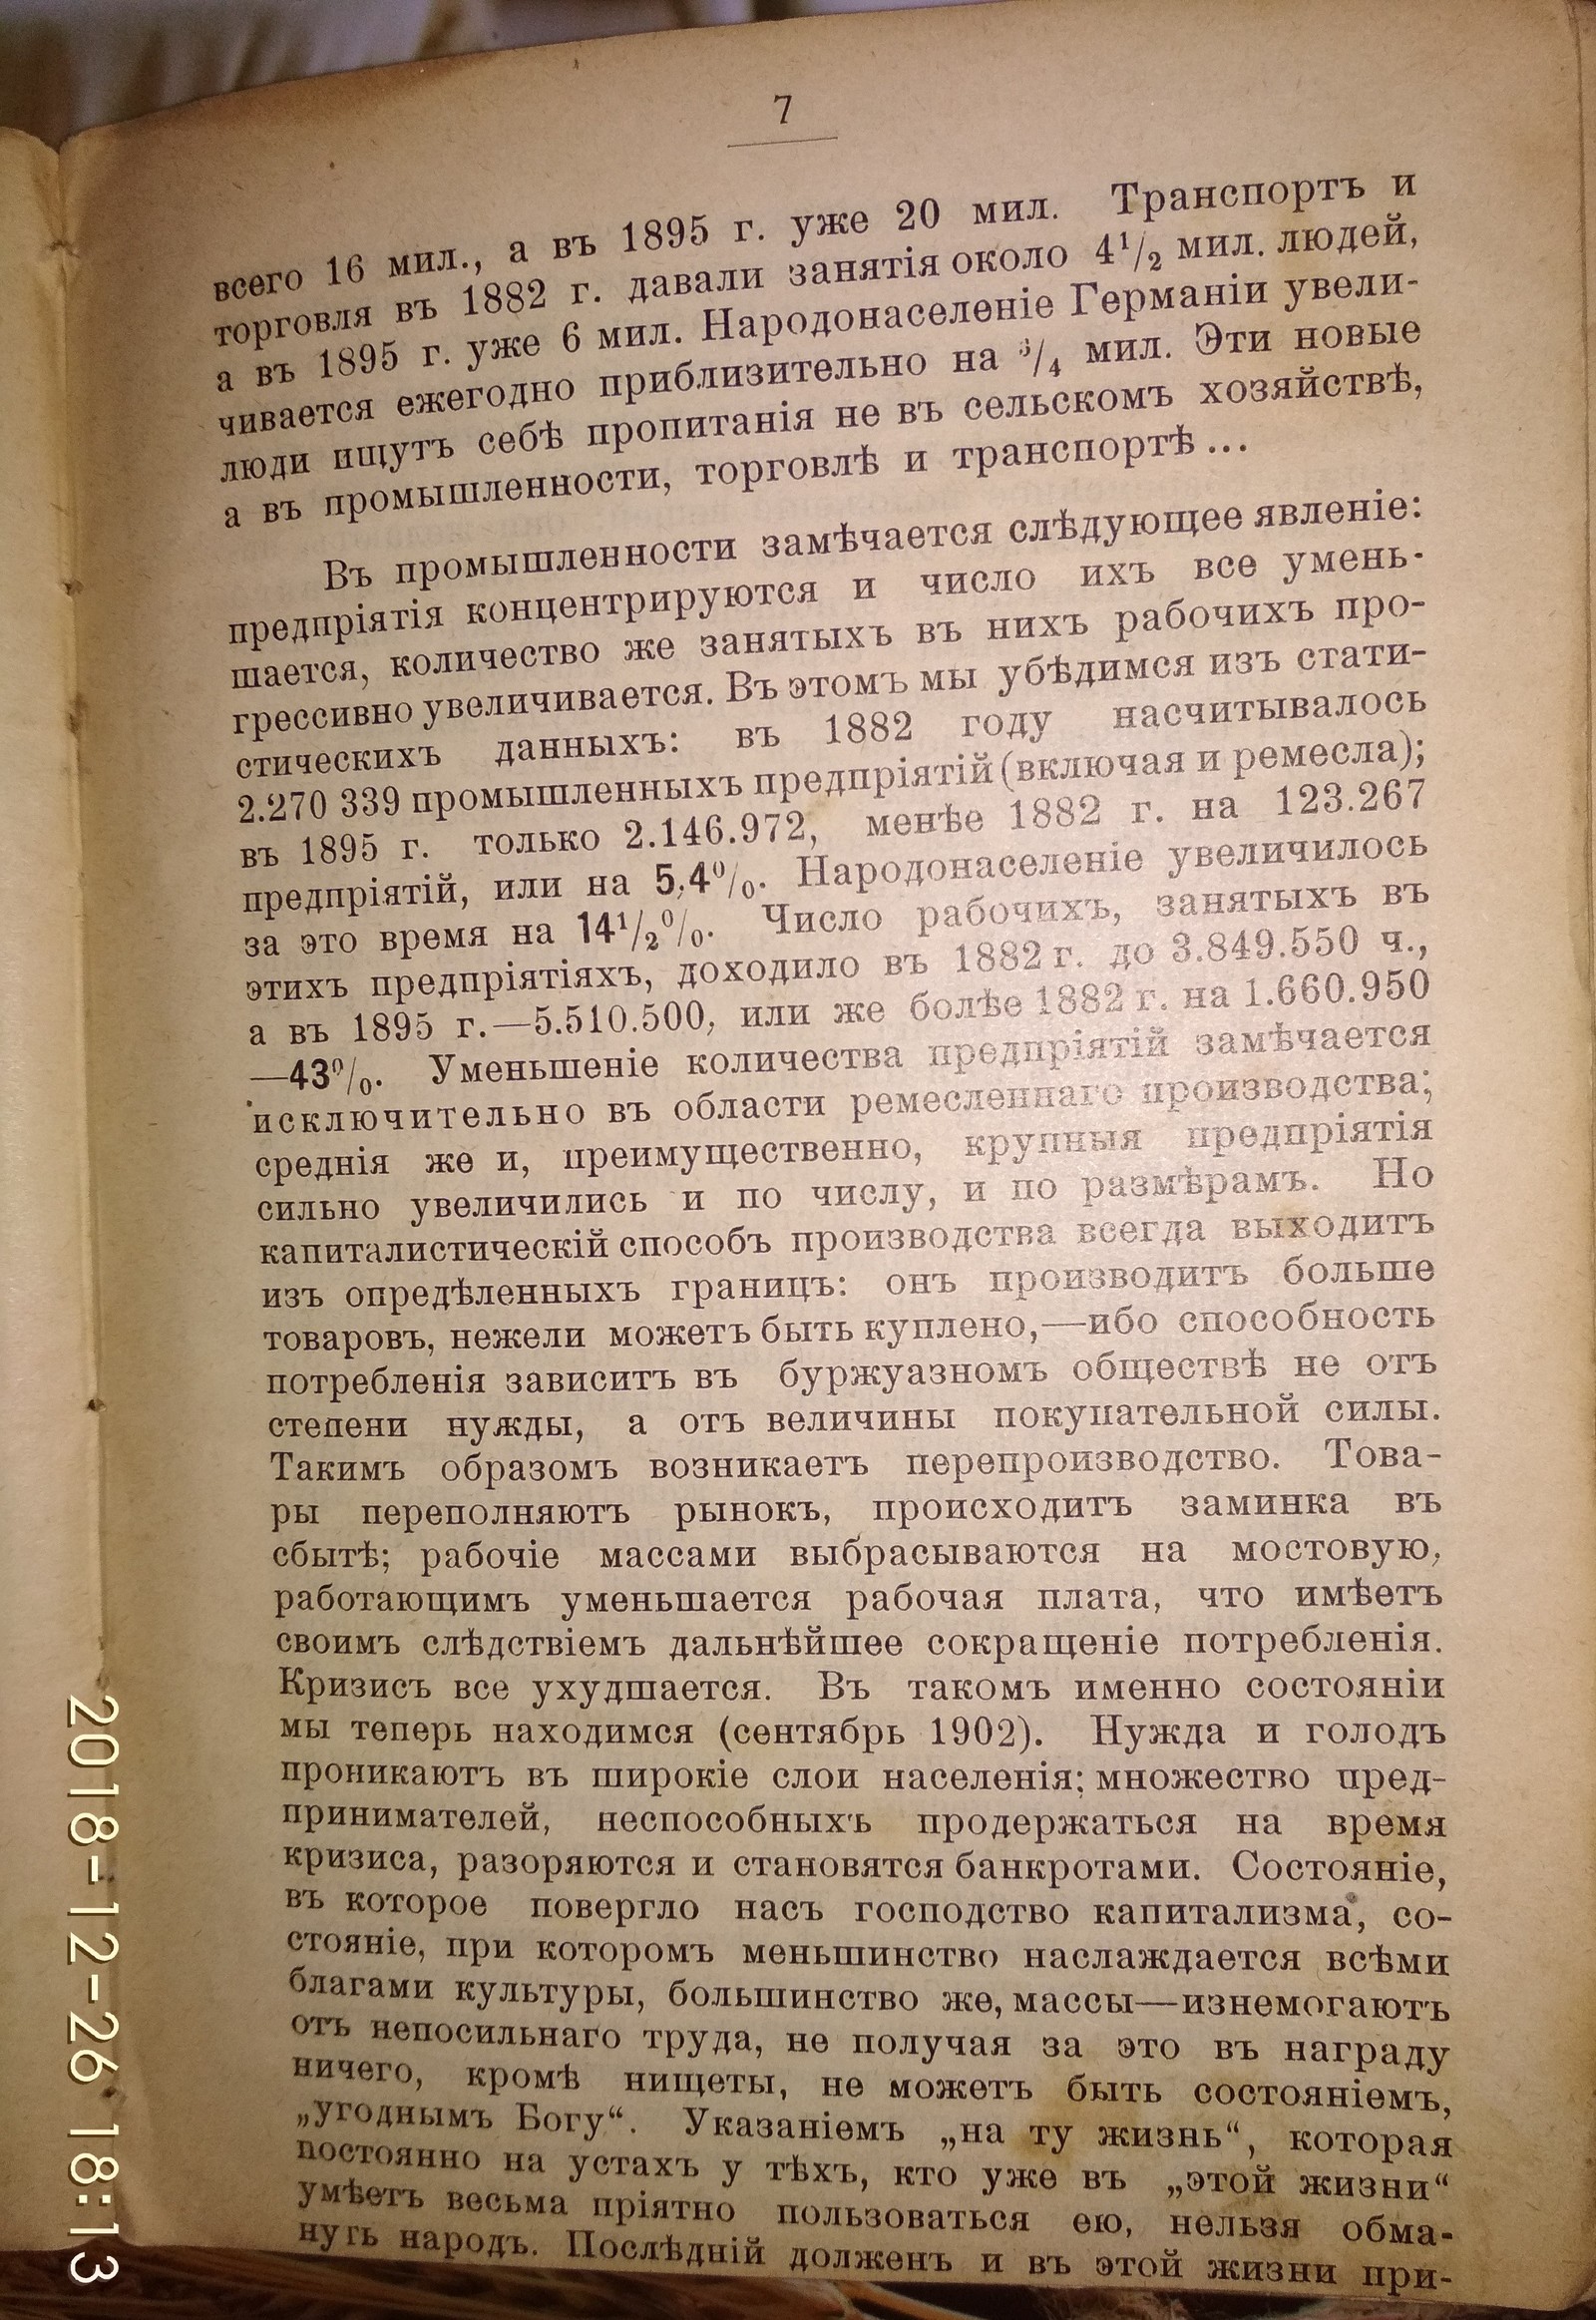 August Bebel's Sins of the Center speech, 1905 - My, Social democracy, , Revolutionaries, Old book, Left-wing movement, Longpost, Old books